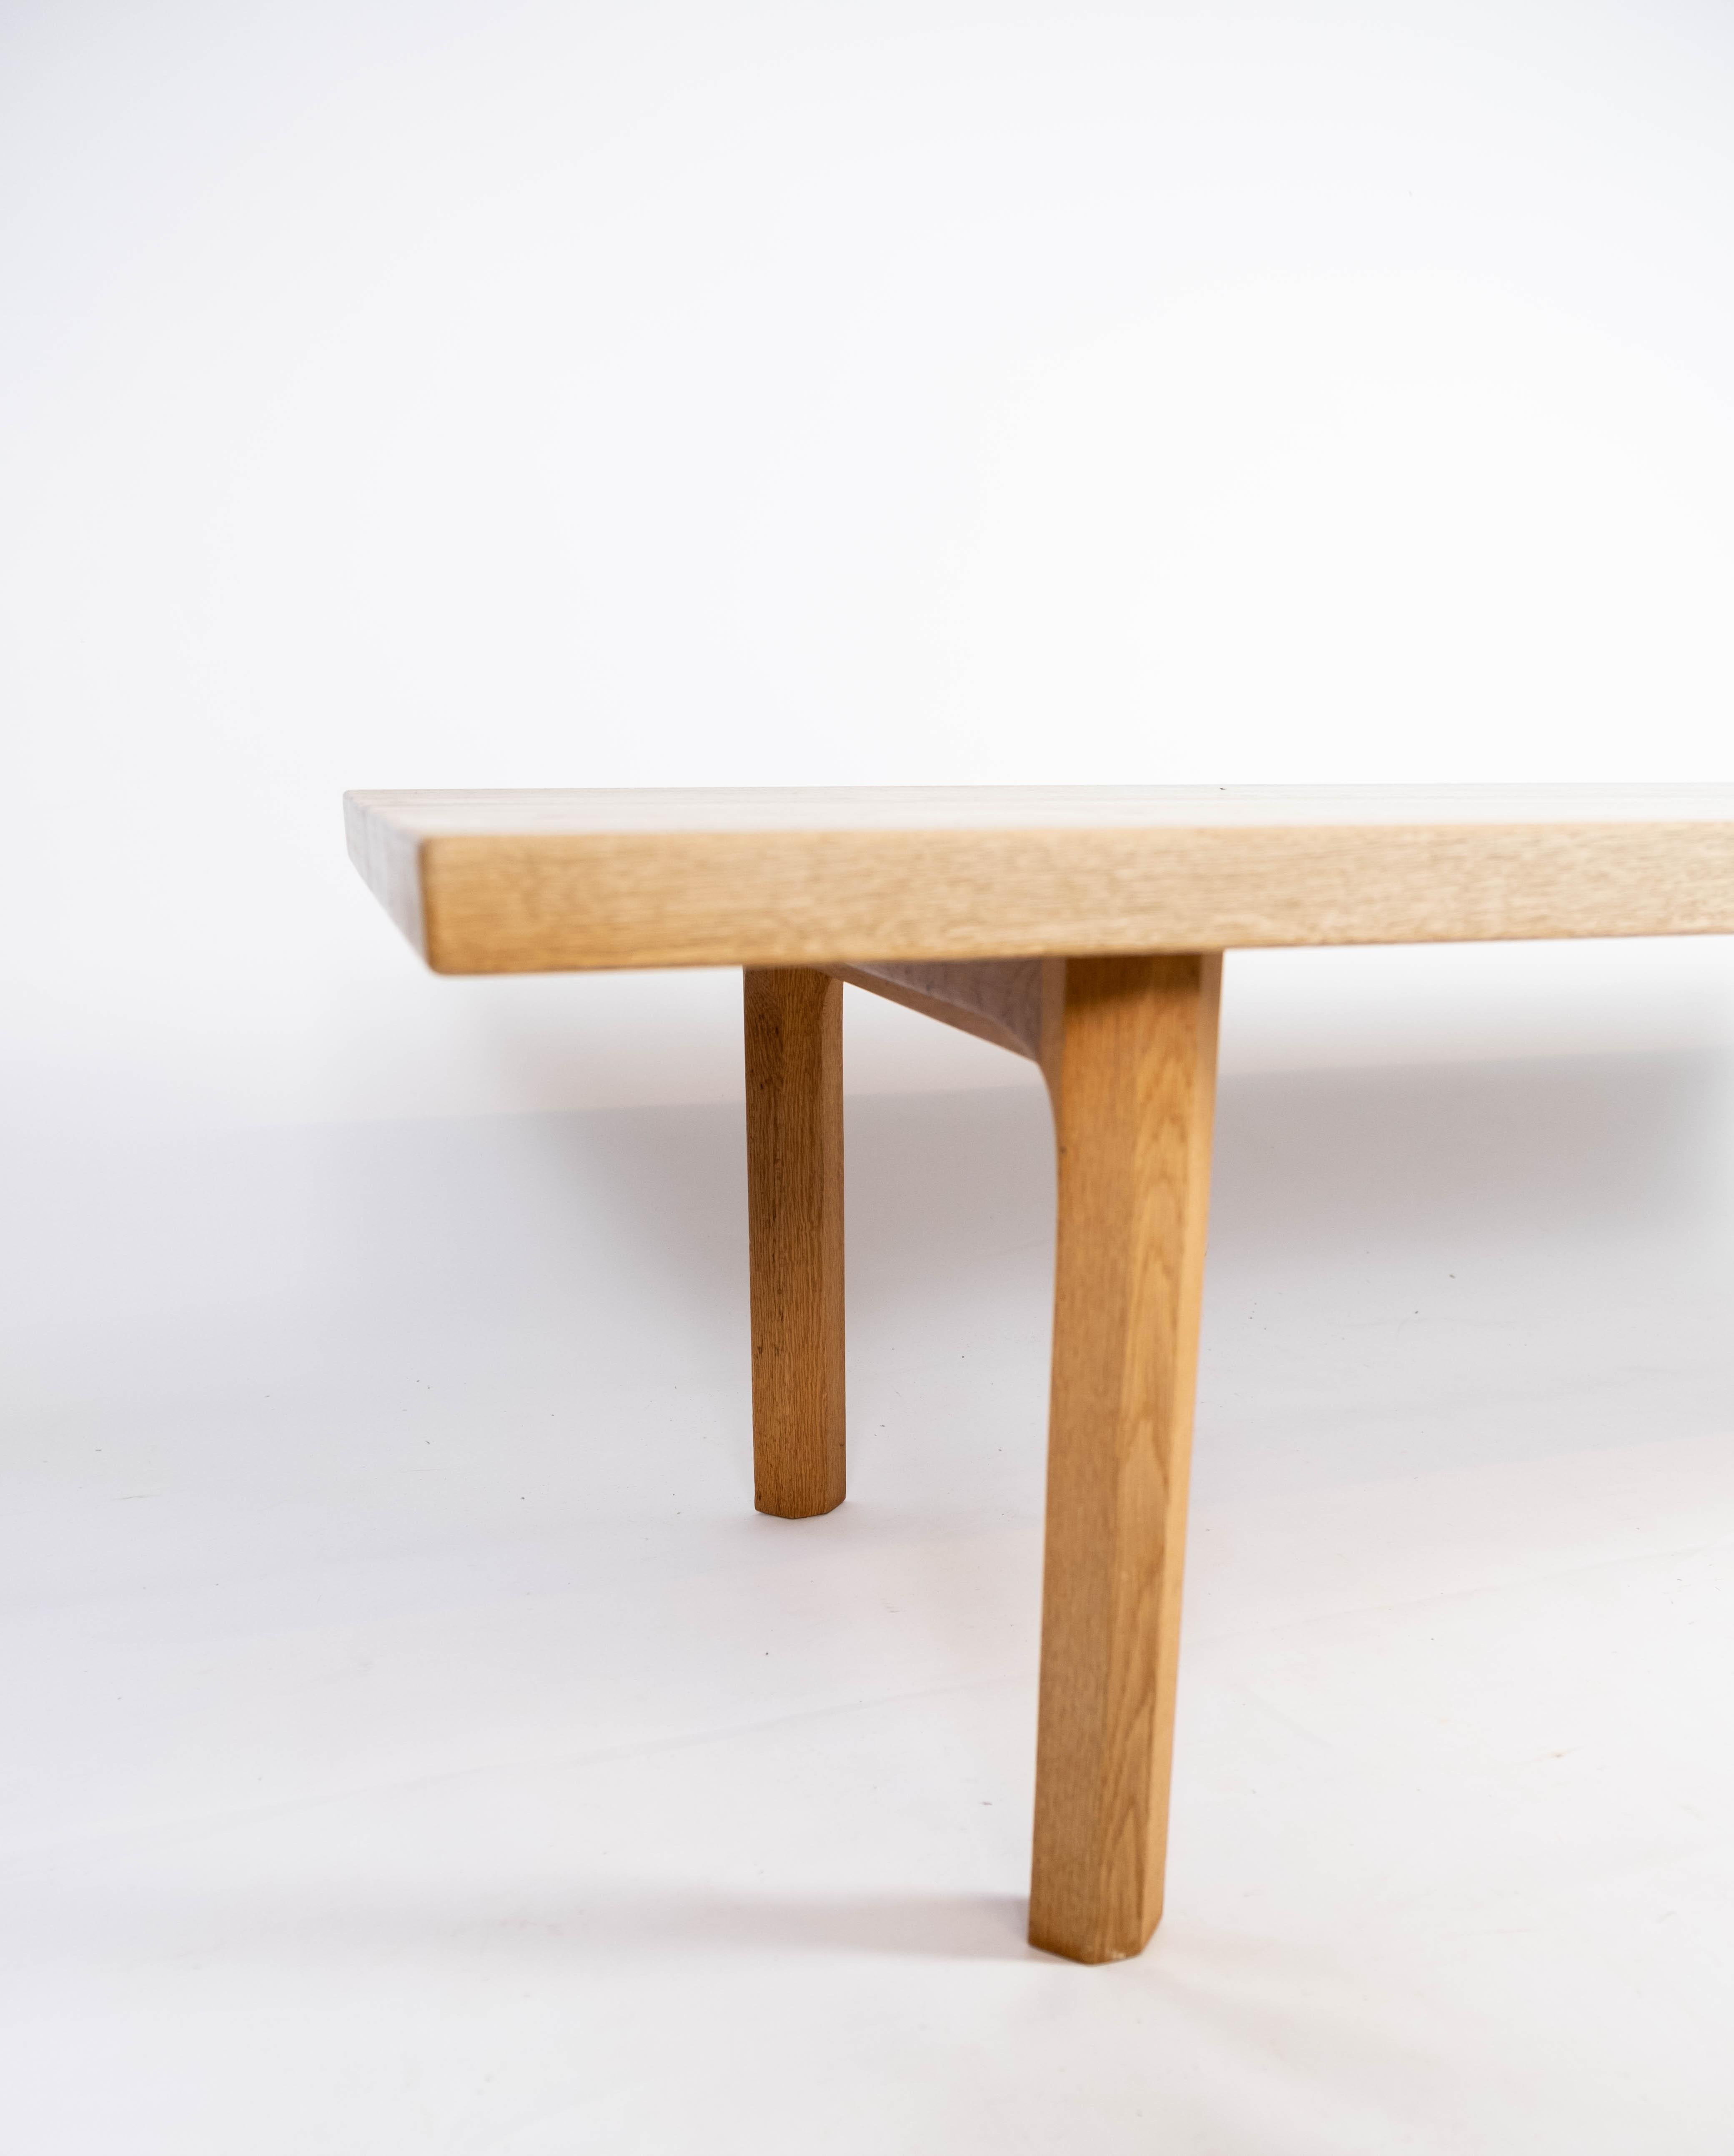 Mid-Century Modern Coffee Table Made In Oak, Danish Design From 1960s For Sale